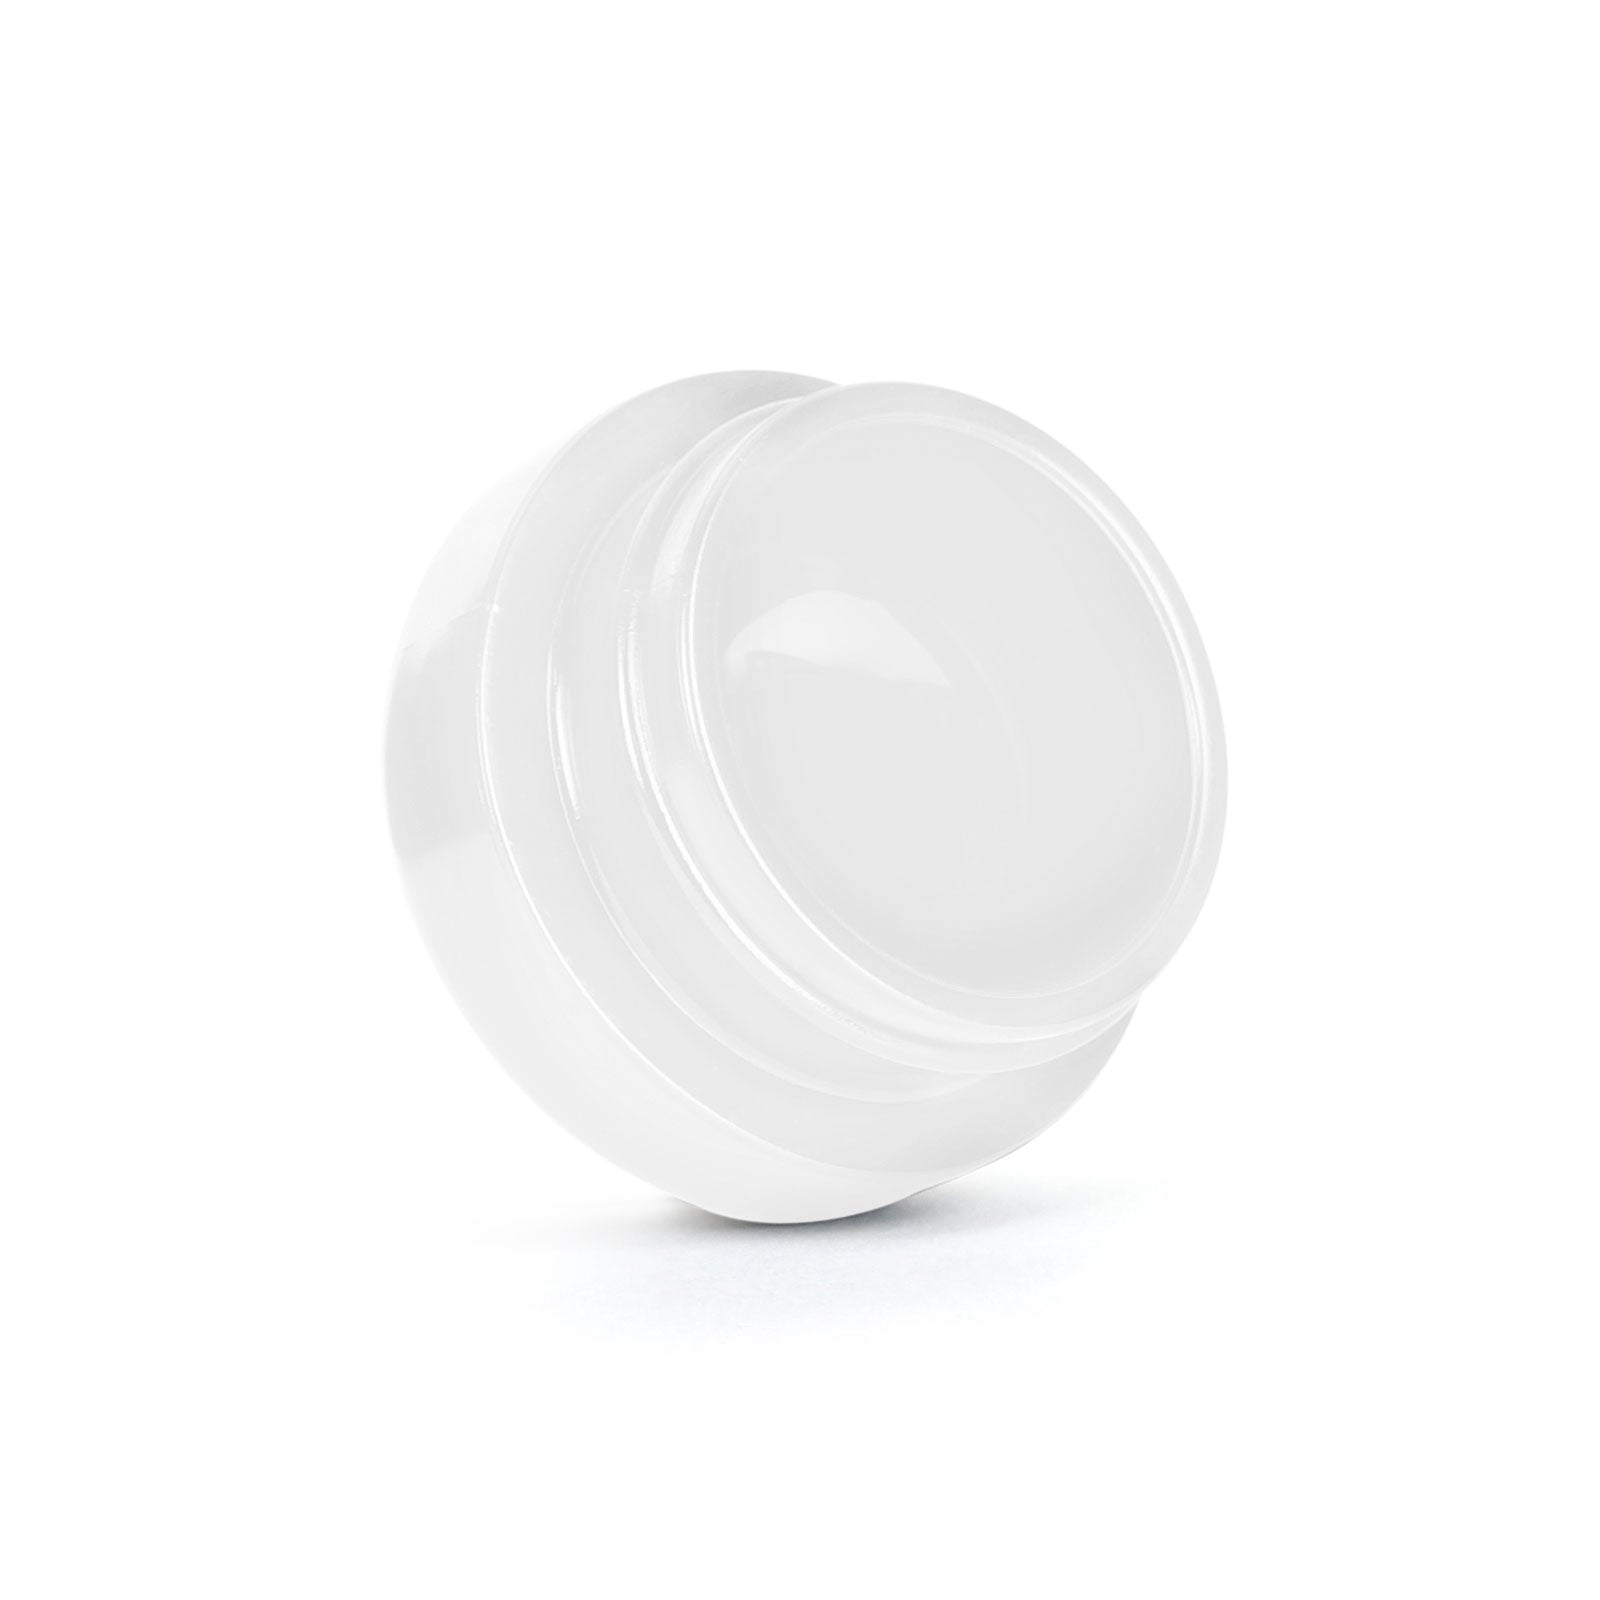 9ml Child Resistant White Glass Jar With White Cap - 2 Gram - 40 Count